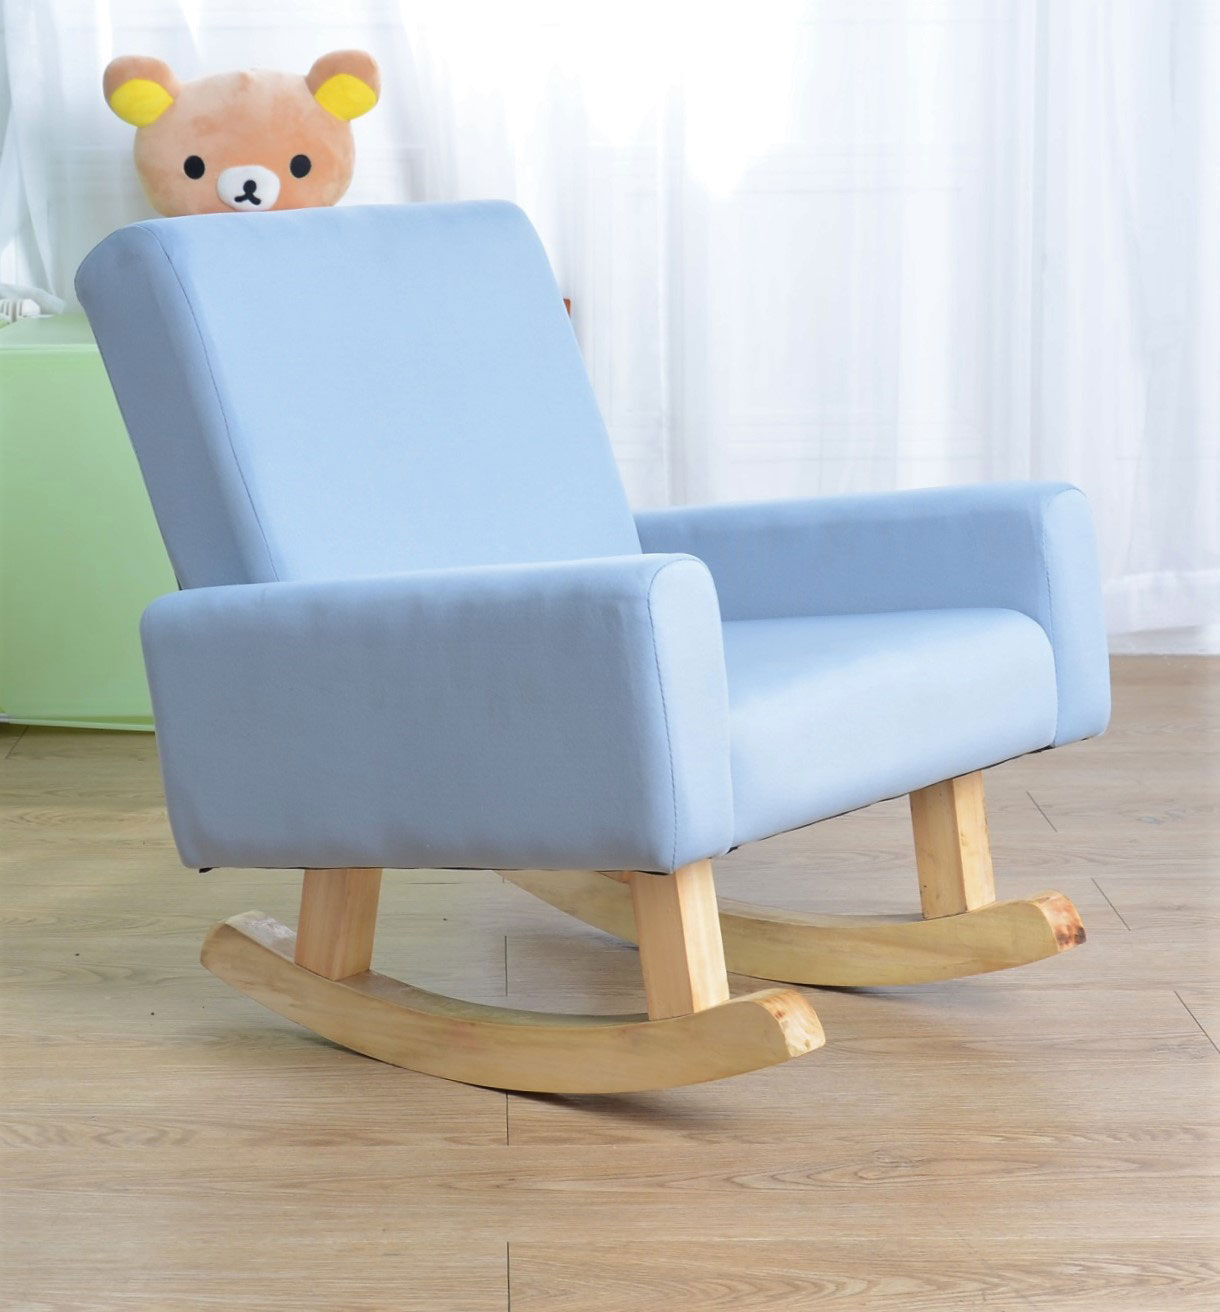 rocking chair toy